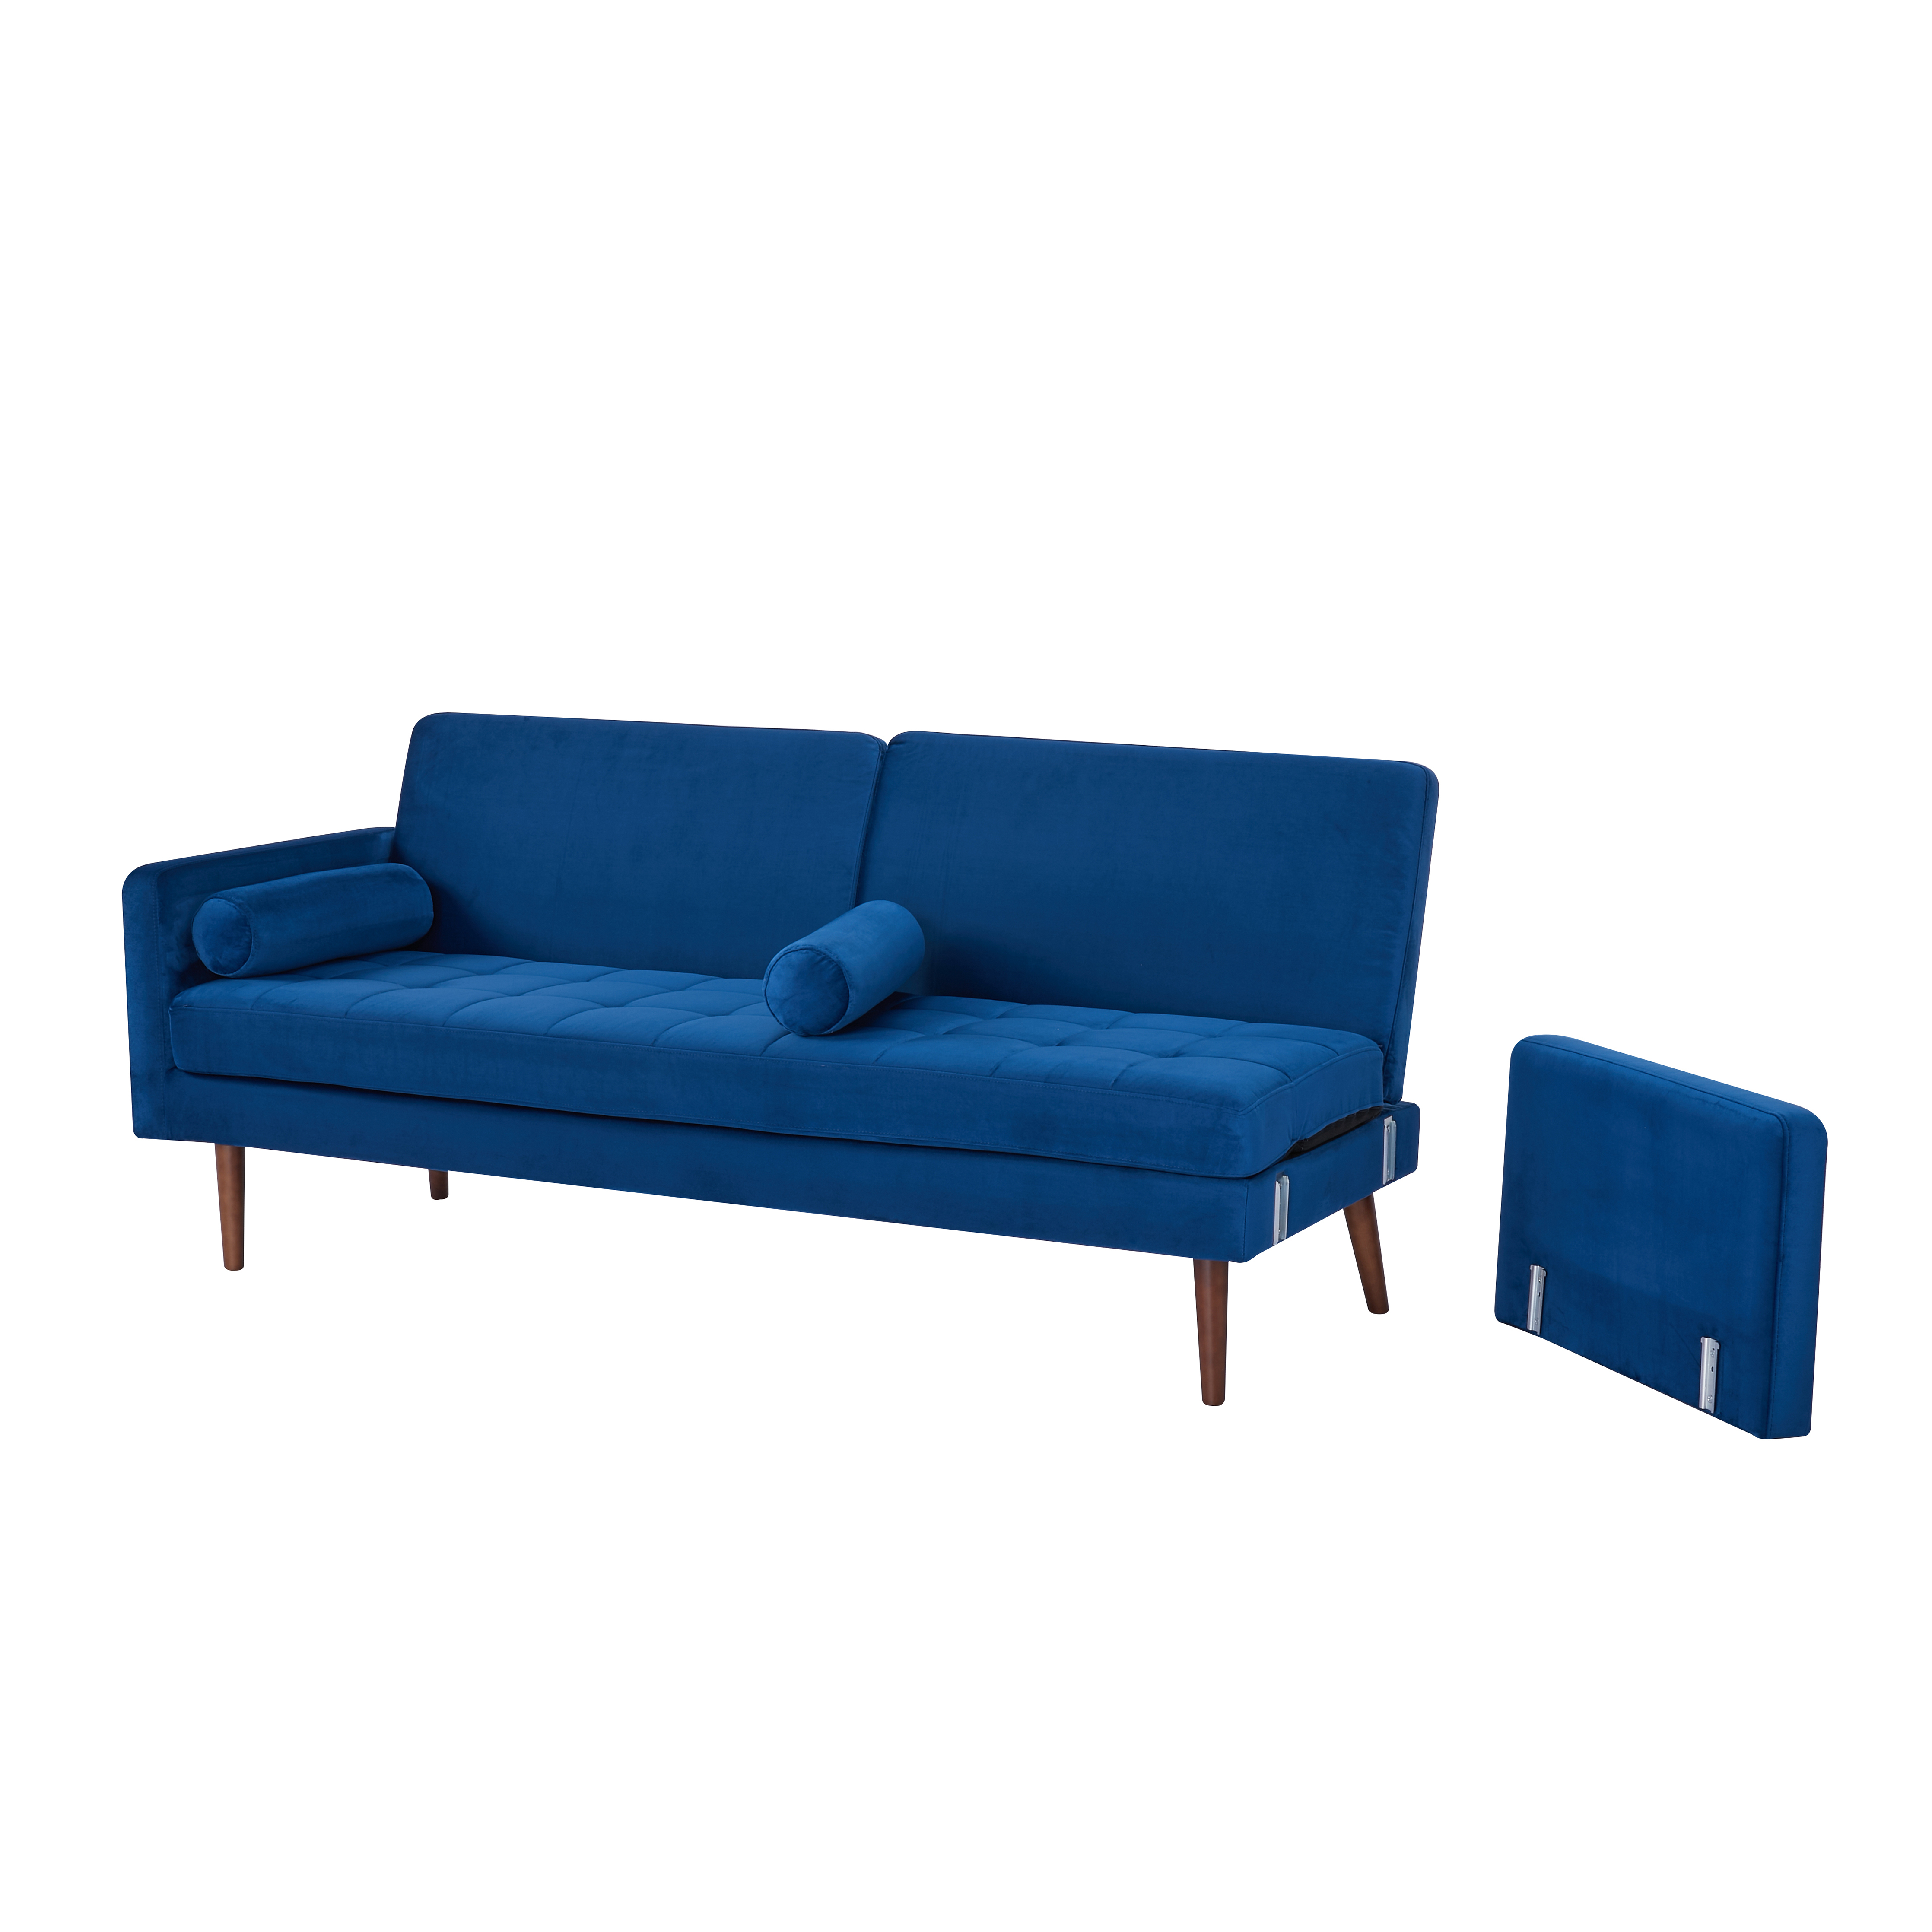 Artdeco Home Portland Convertible Velvet Sofa: Stylish Space-Saving Solution with Comfortable Seating and Twin Sleeper Size